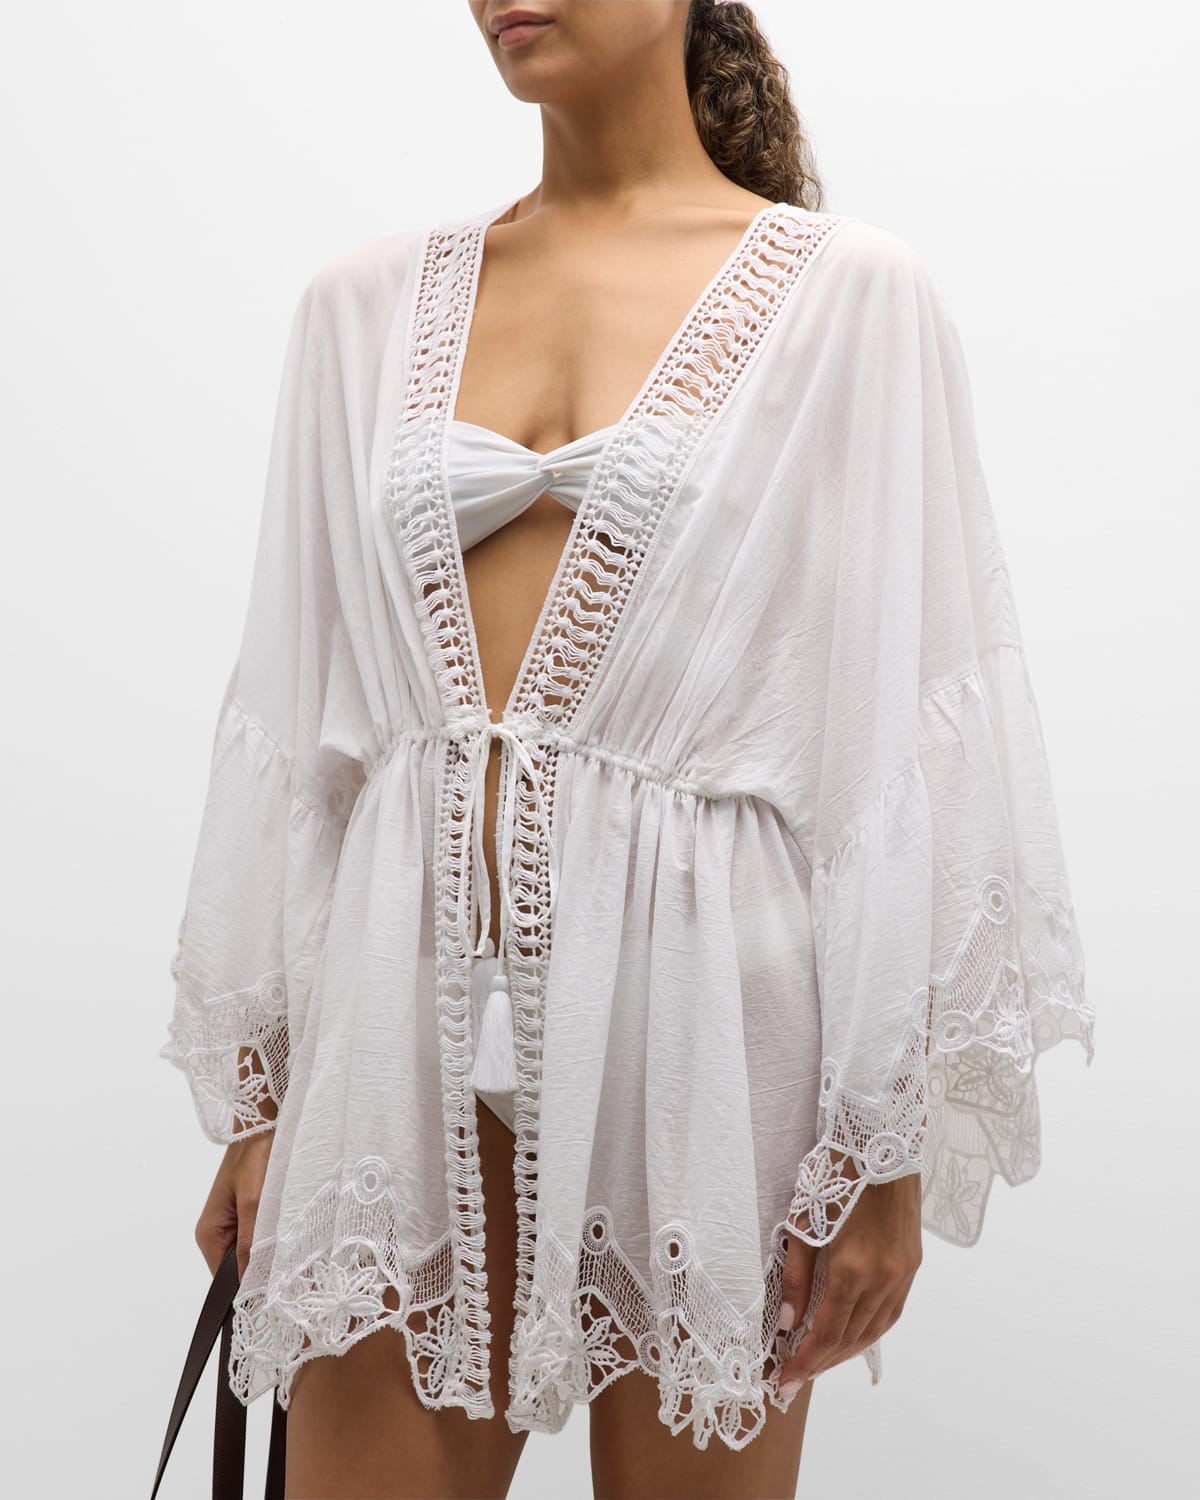 Ramy Brook April Lace Caftan Coverup In White